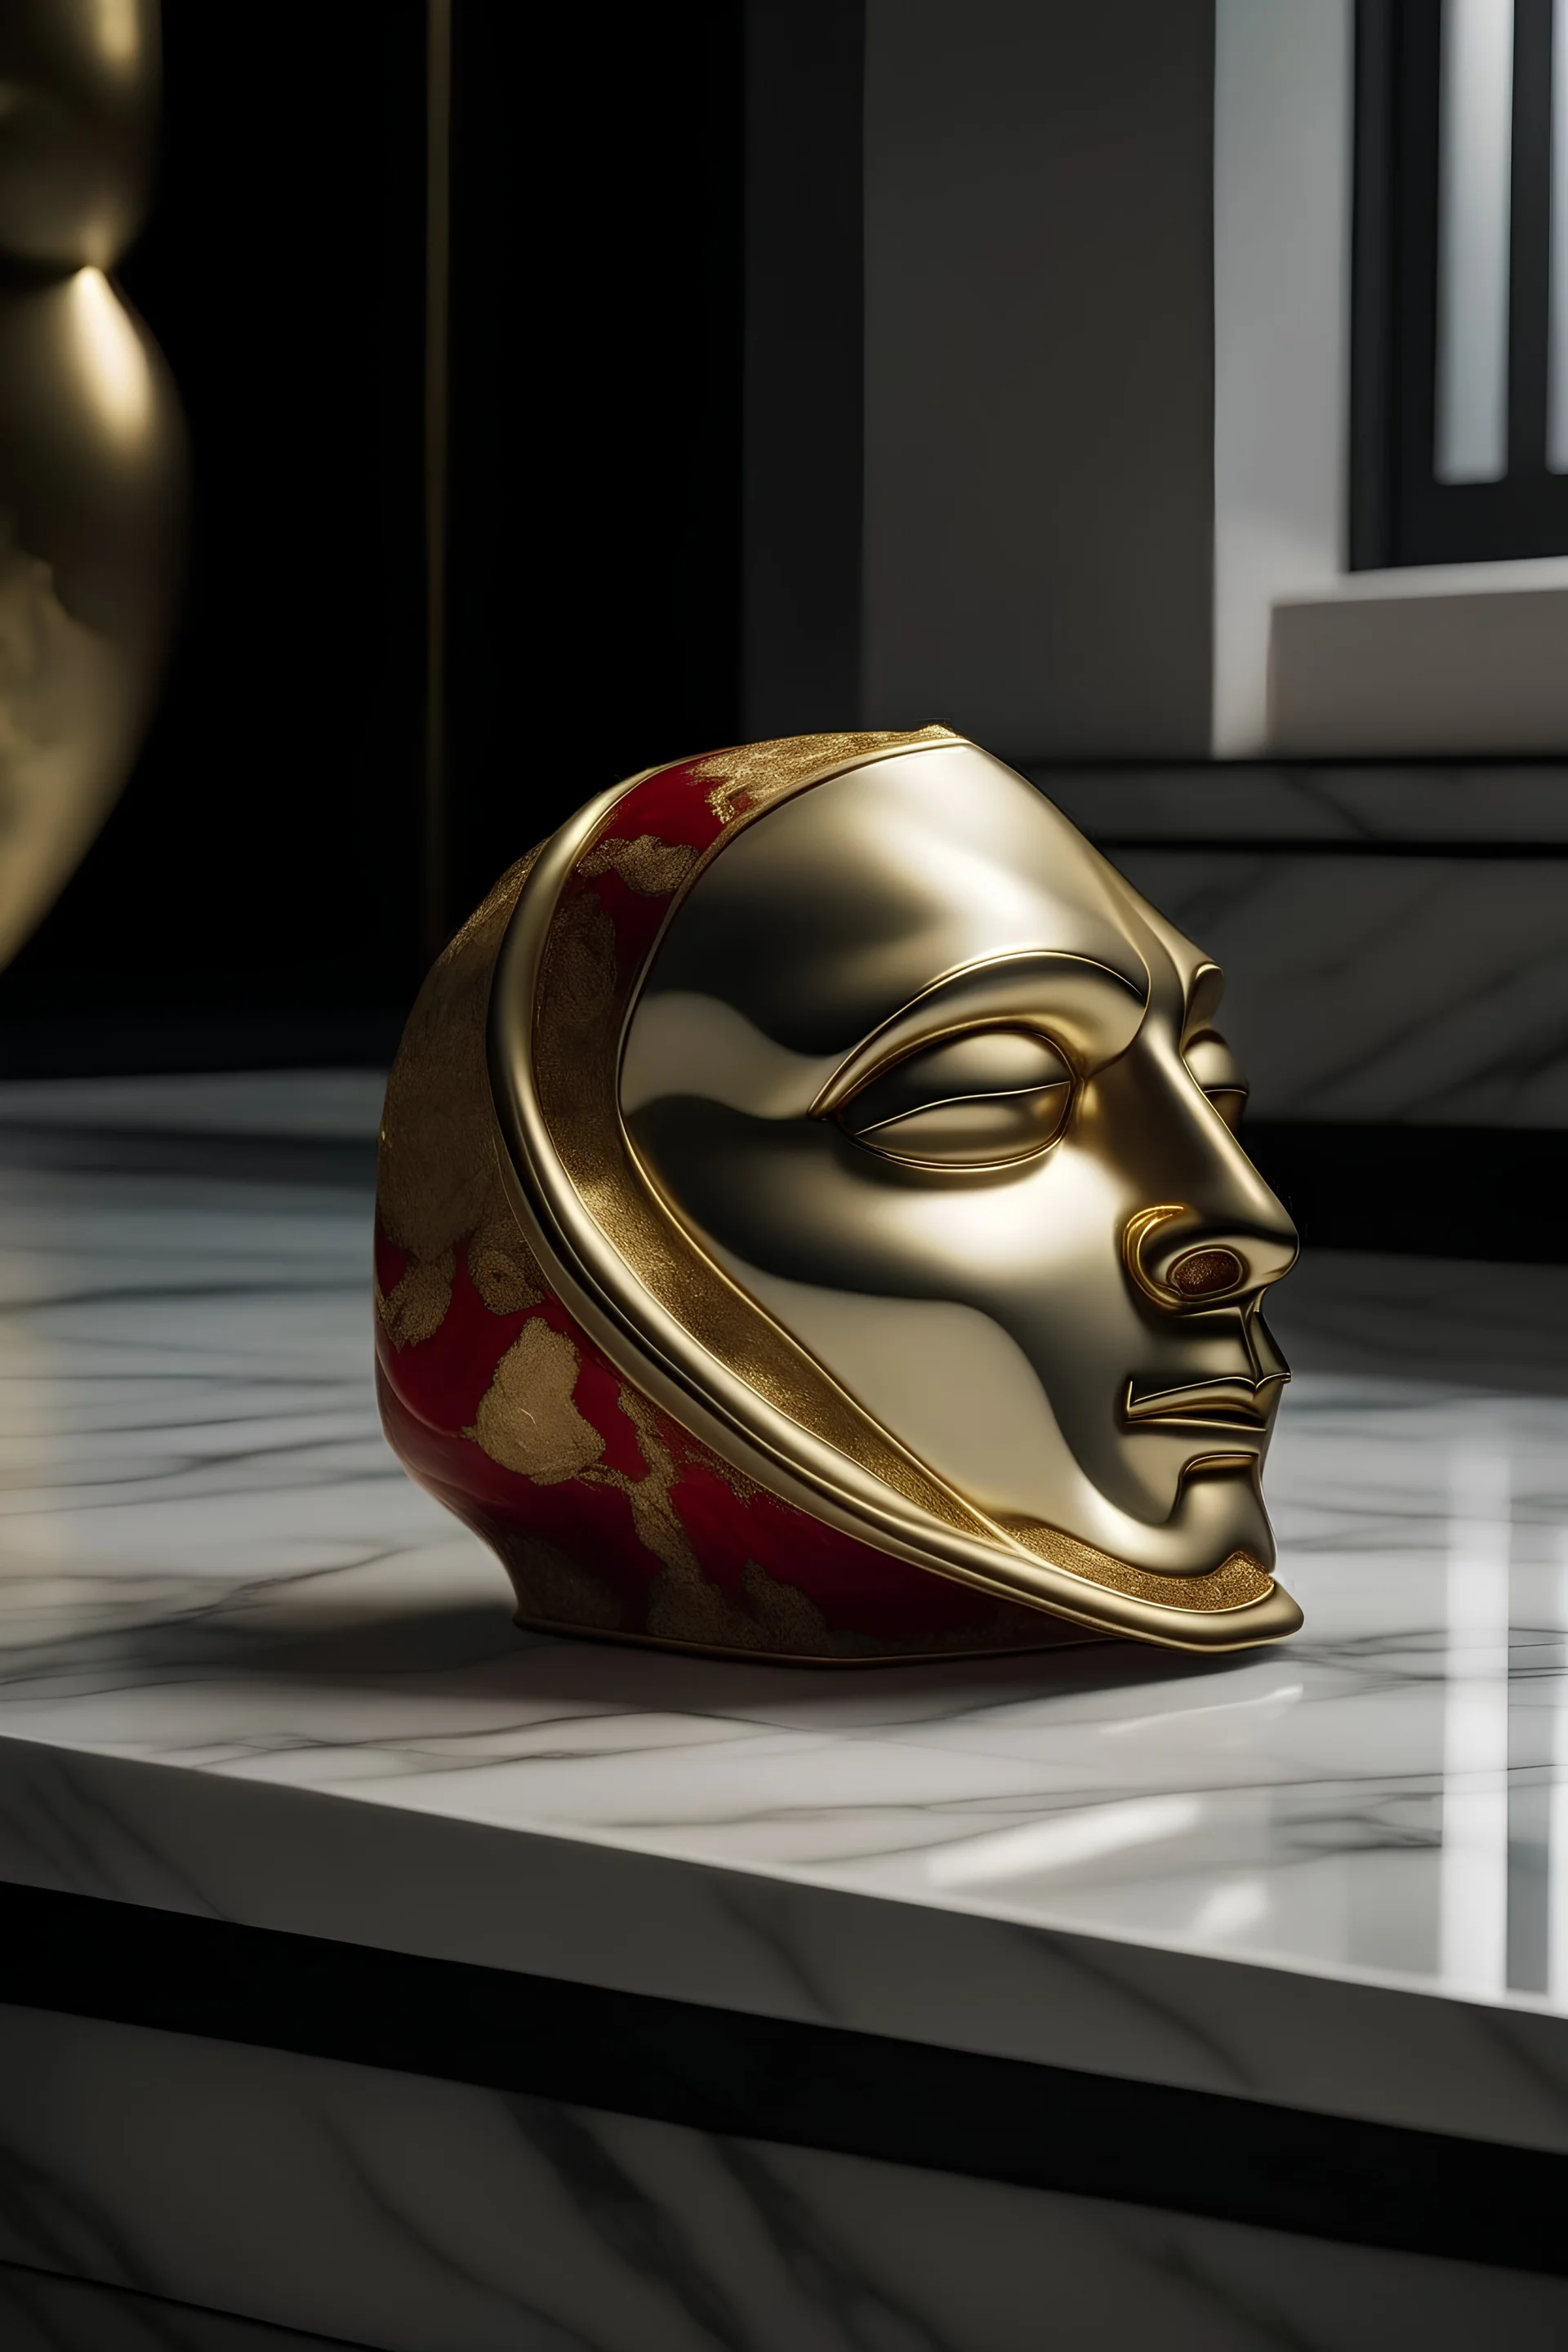 Money Heist Mask "Visualize a luxurious clutch bag resting elegantly on a marble countertop, bathed in soft, golden light."